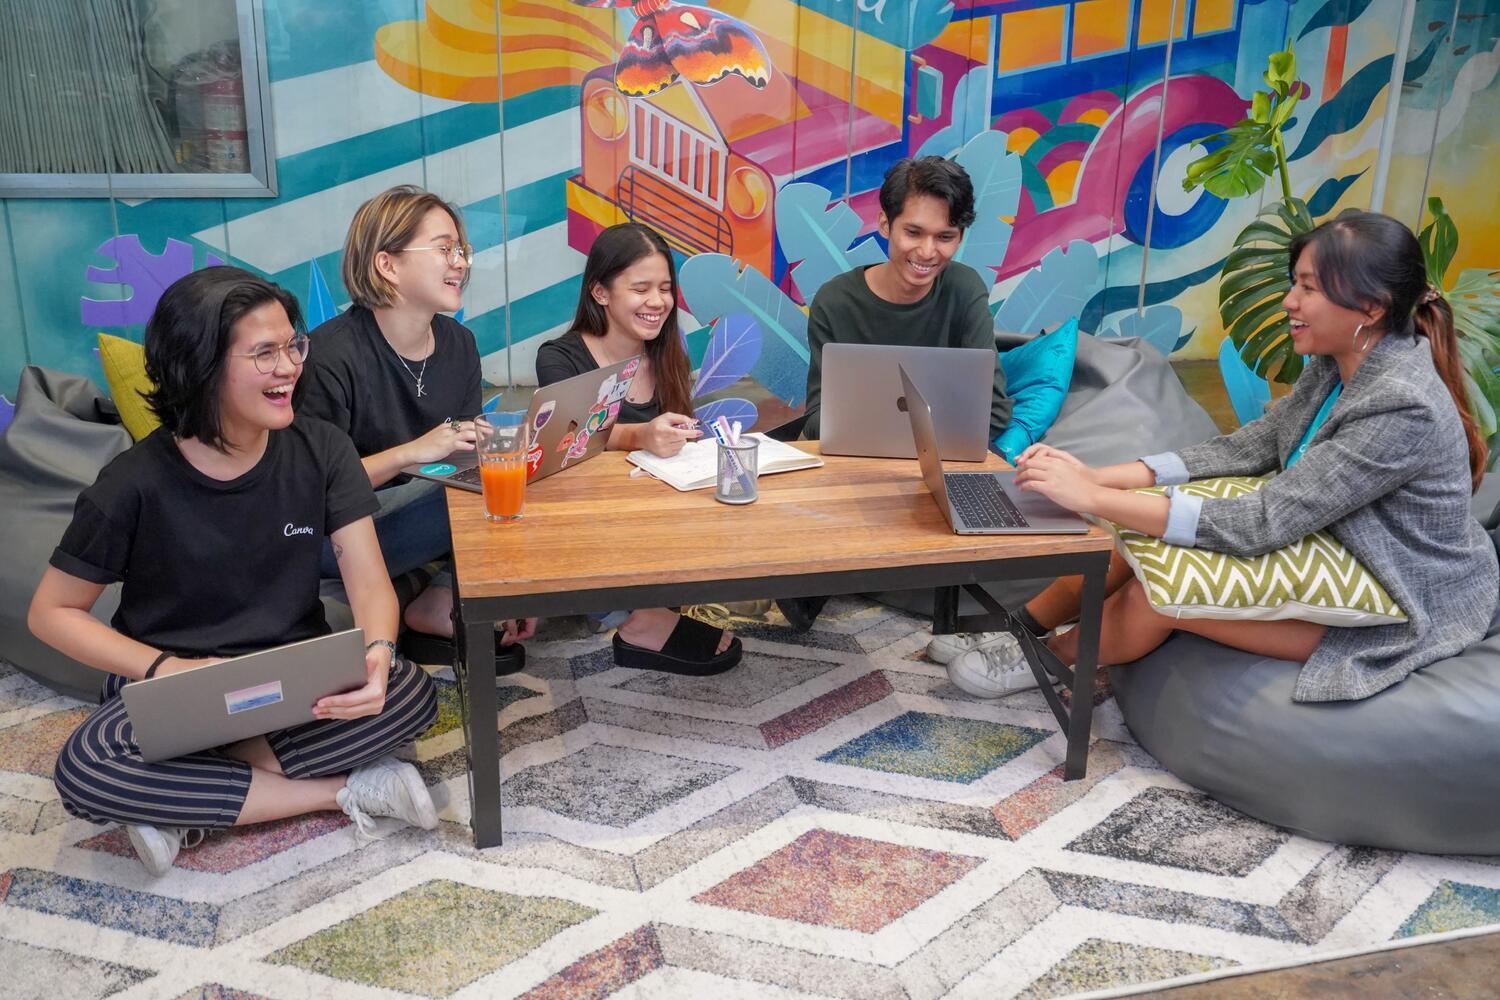  How Canva Uses Creativity and Company Vision to Keep Remote Employees Engaged